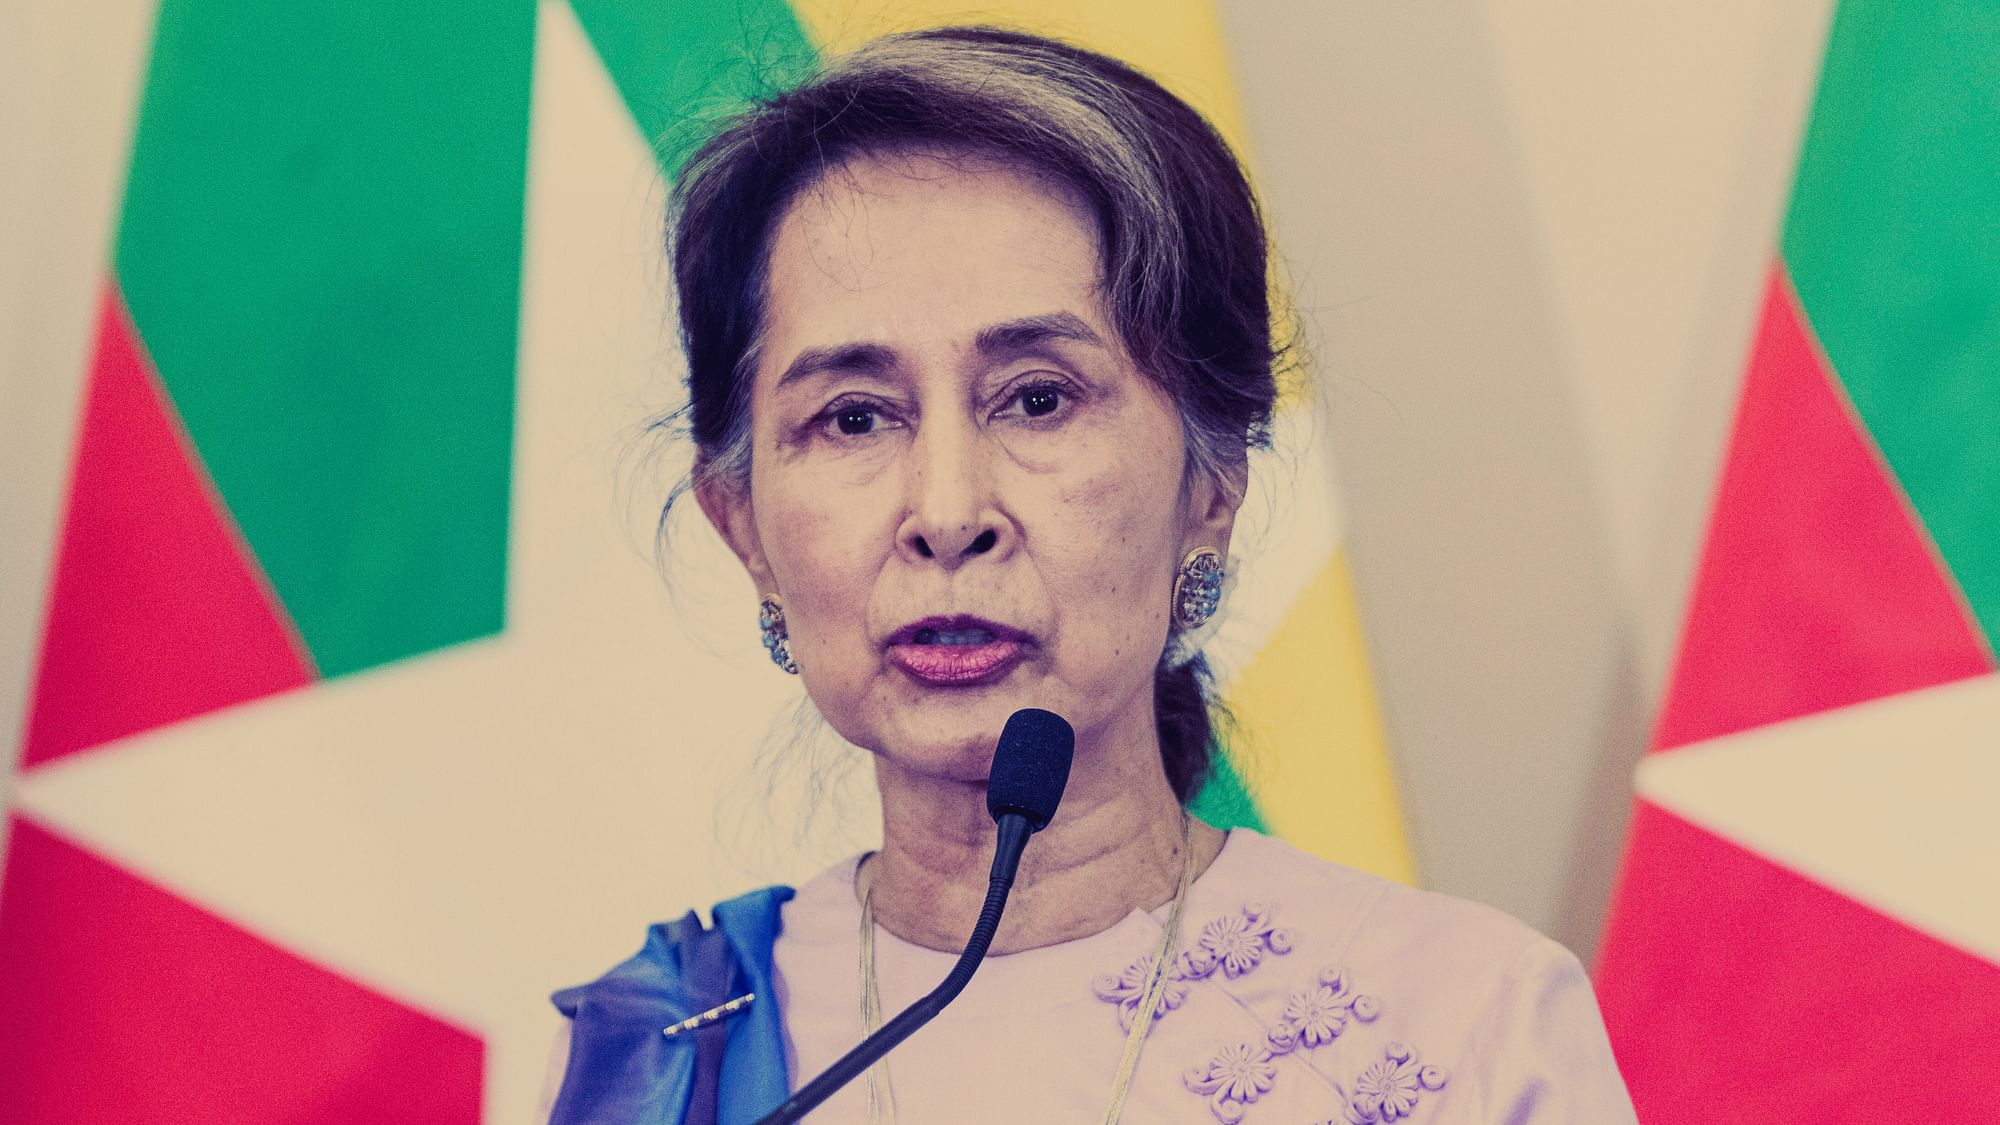 <div class="paragraphs"><p><a href="https://www.thequint.com/topic/aung-san-suu-kyi">Suu Kyi</a> was earlier <a href="https://www.thequint.com/news/world/myanmar-court-sentences-aung-san-suu-kyi-to-5-years-of-jail-for-corruption">sentenced</a> to 11-year prison sentence at the&nbsp;<a href="https://www.thequint.com/news/world/ousted-state-counsellor-myanmar-aung-san-suu-kyi-4-more-years-jail">various trials</a> that took place after the military took over her elected government in <a href="https://www.thequint.com/news/world/explained-myanmars-military-history-and-what-led-to-recent-coup">February 2021 coup</a>. She was booked under charges including sedition and corruption.</p></div>